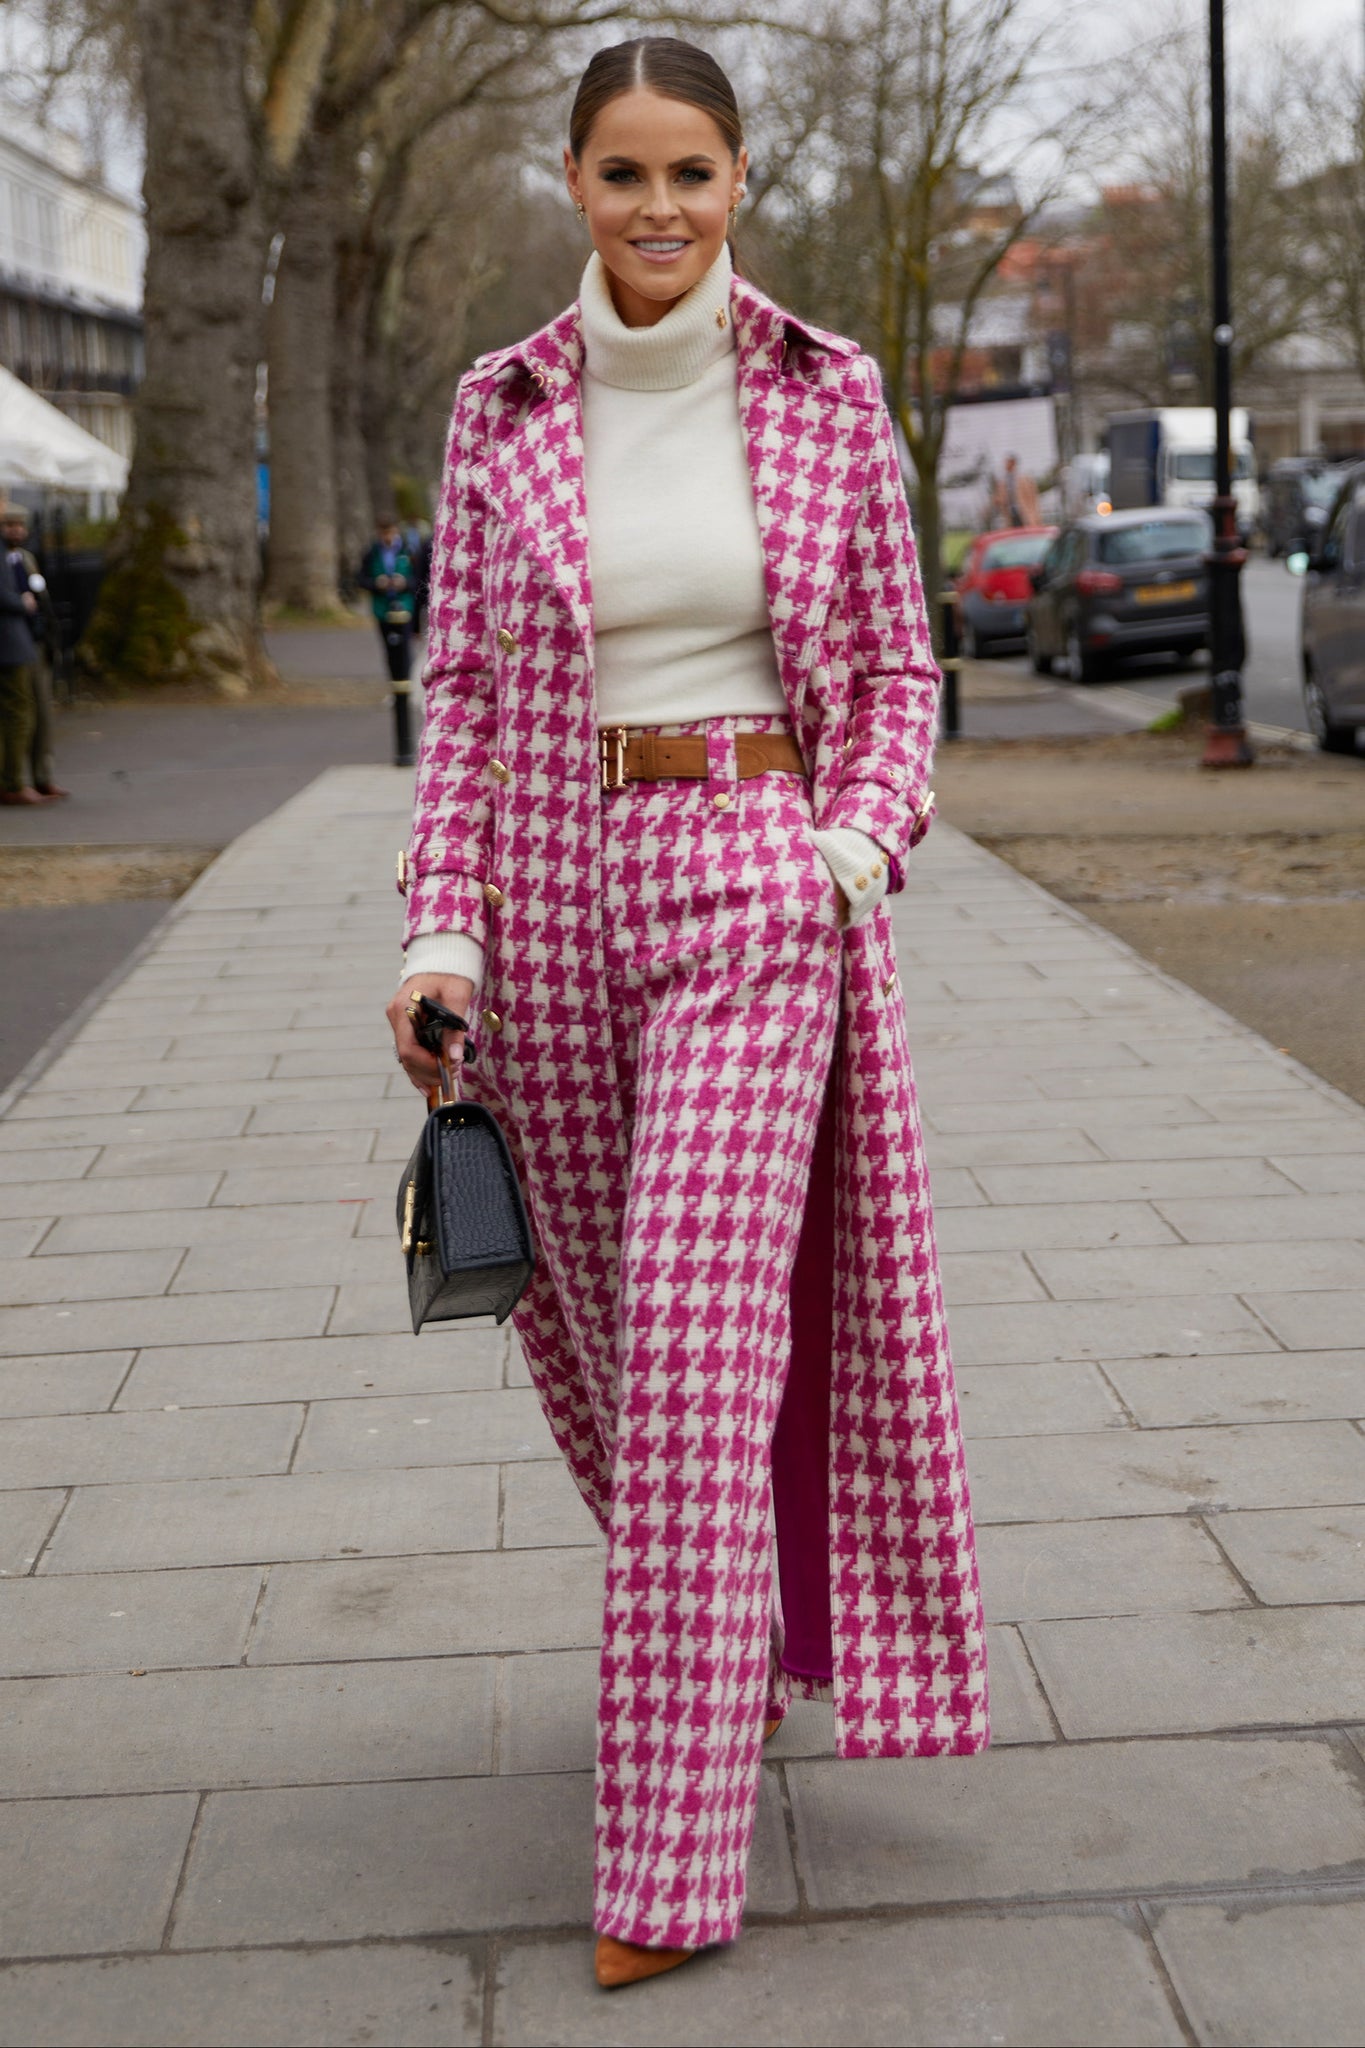 Women's hot pink houndstooth wool high waisted straight trousers with white roll neck top, tan suede belt and hot pink houndstooth trench coat